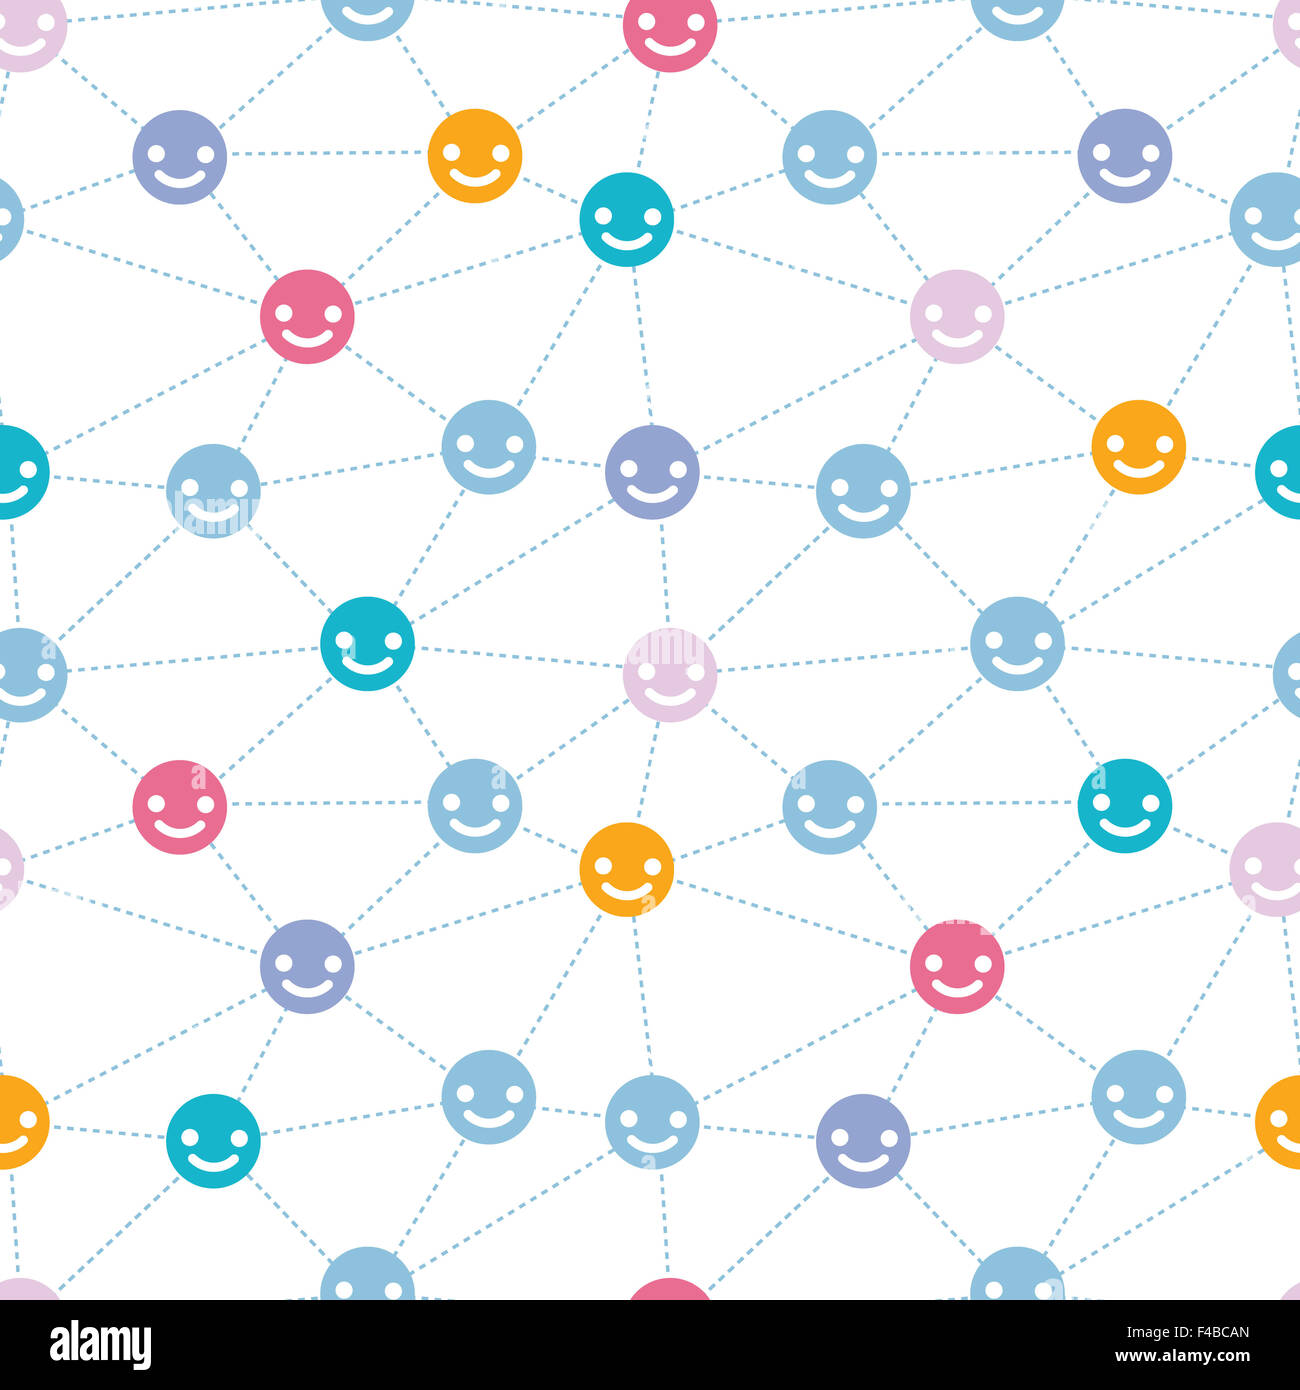 Network of happy faces seamless pattern background Stock Photo